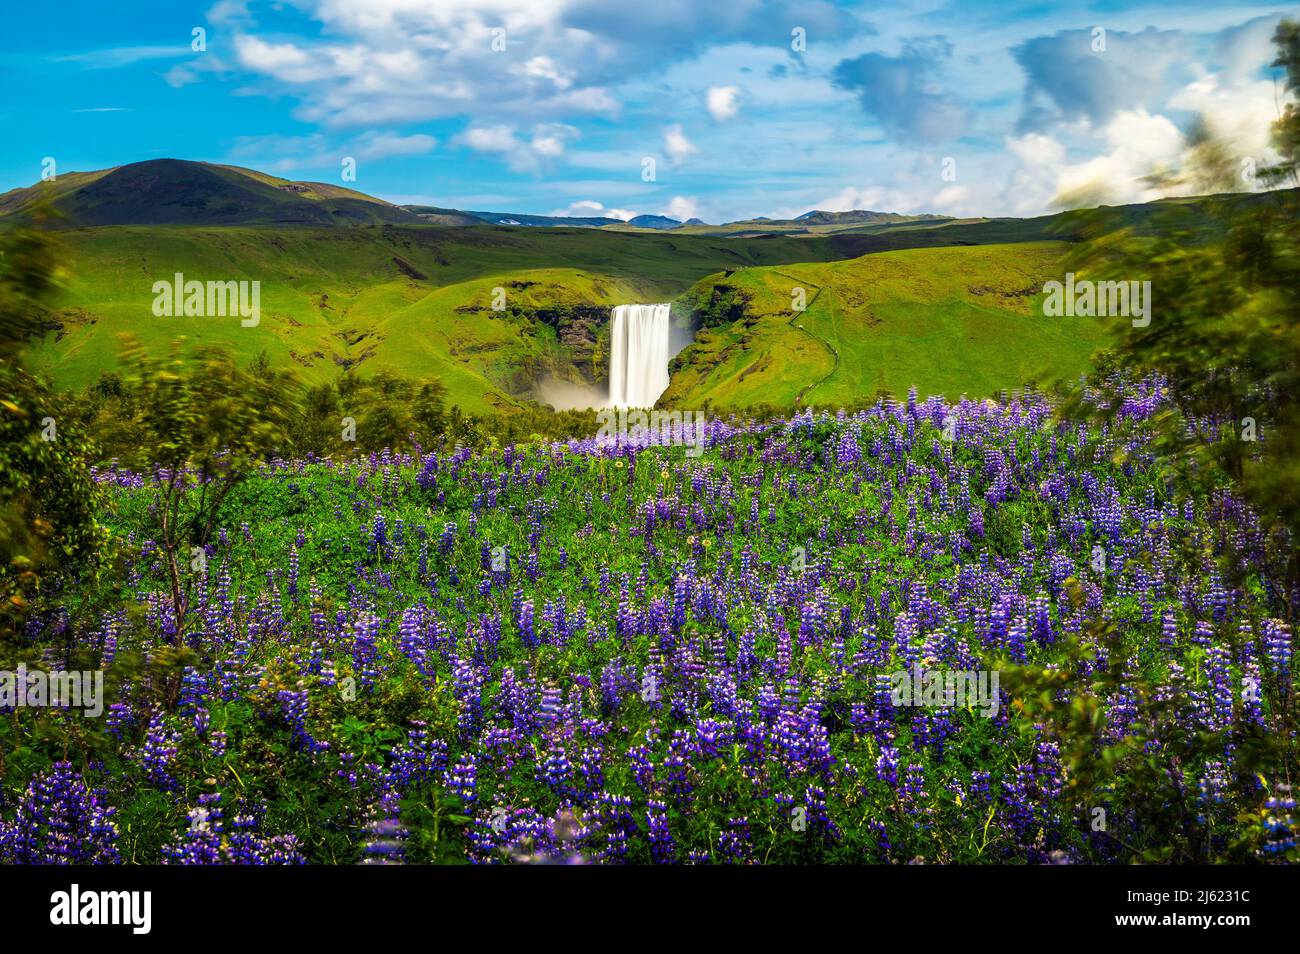 Skogafoss waterfall in southern Iceland with blooming flowers in the foreground Stock Photo